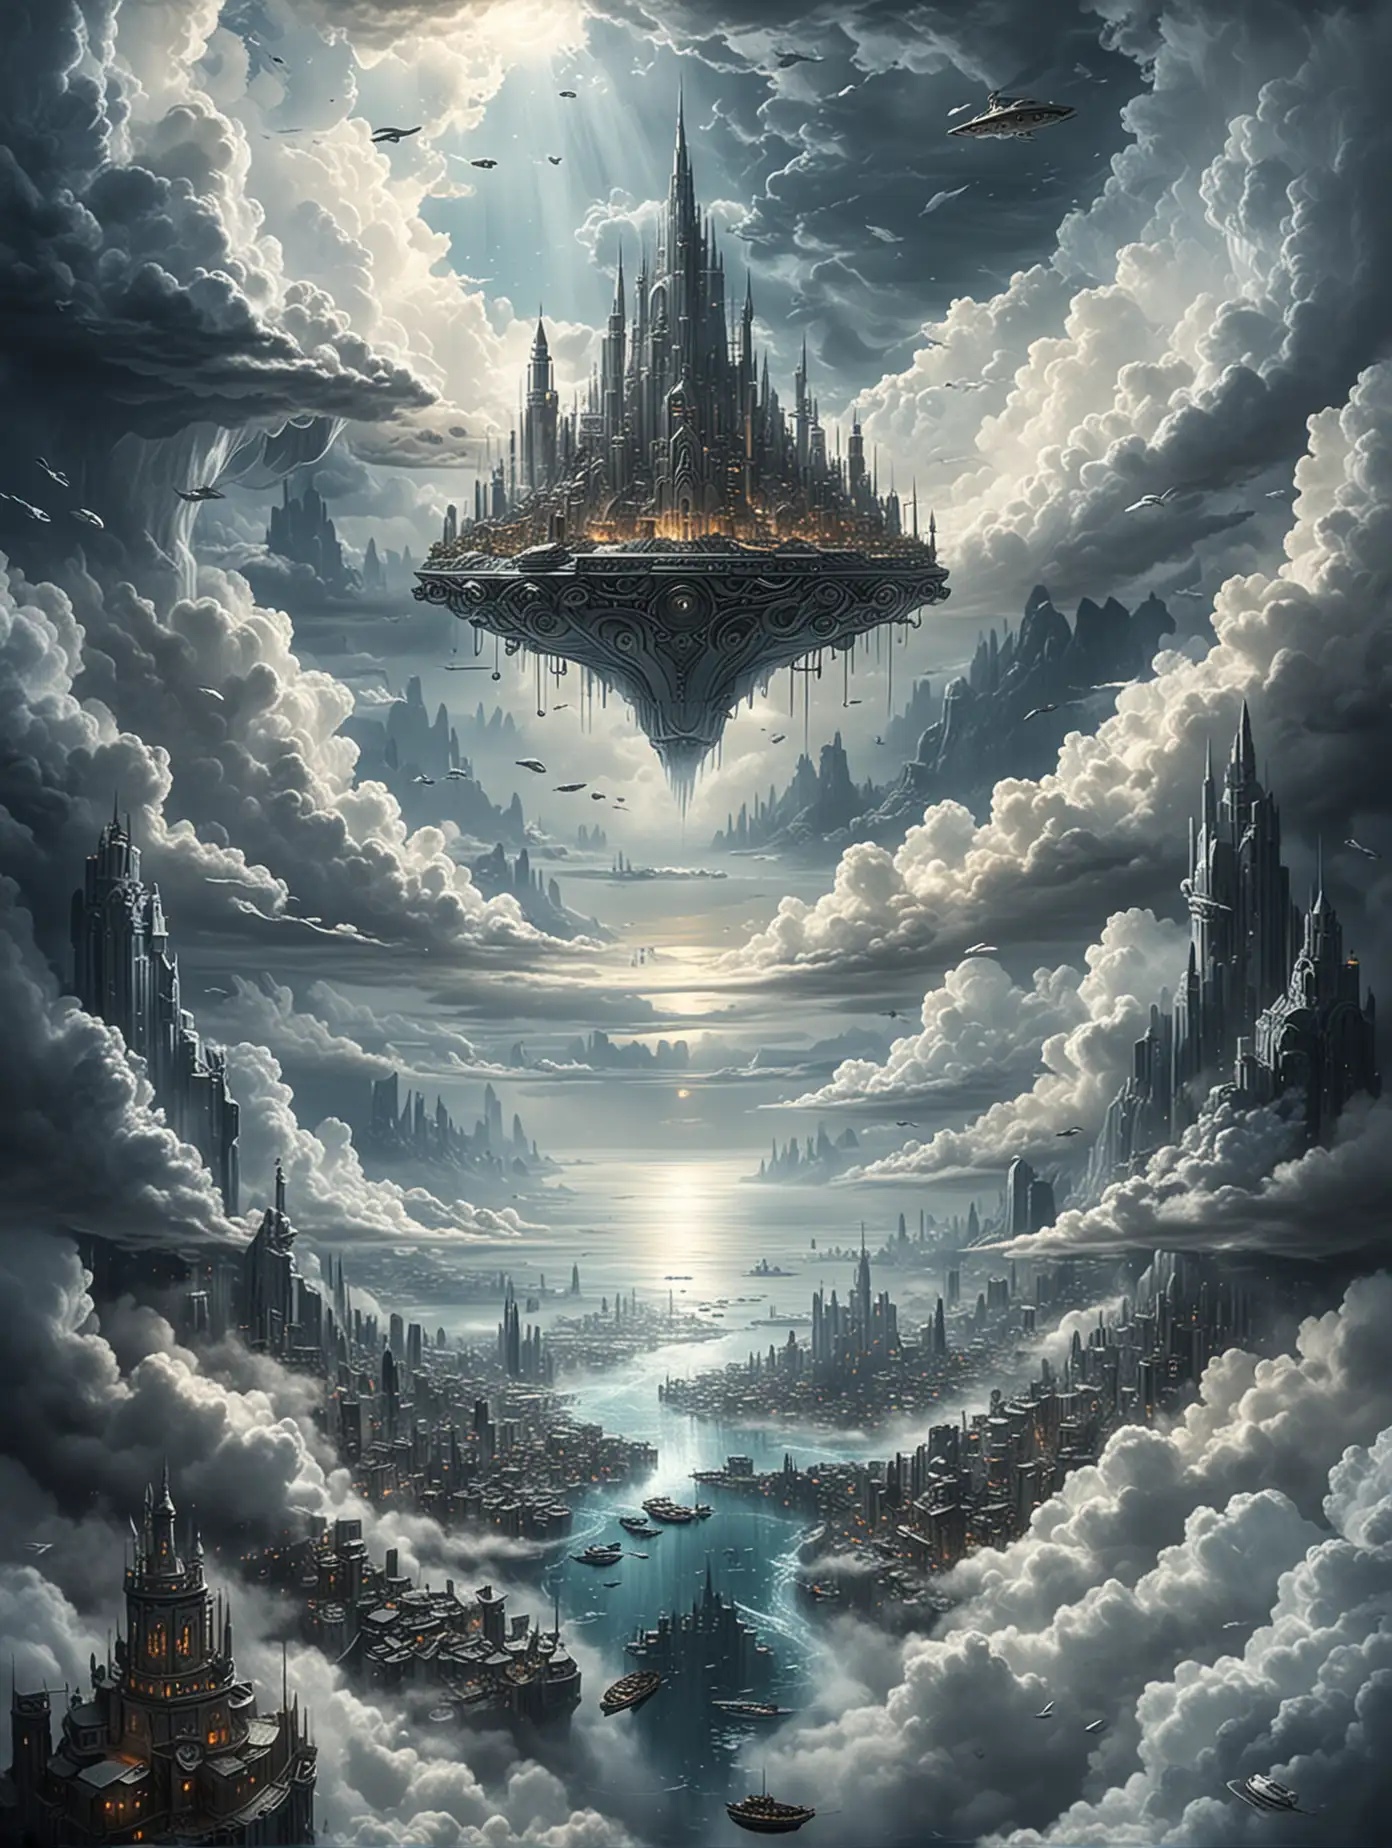 A Silver City floating in the clouds above a city of rings upon the ocean.